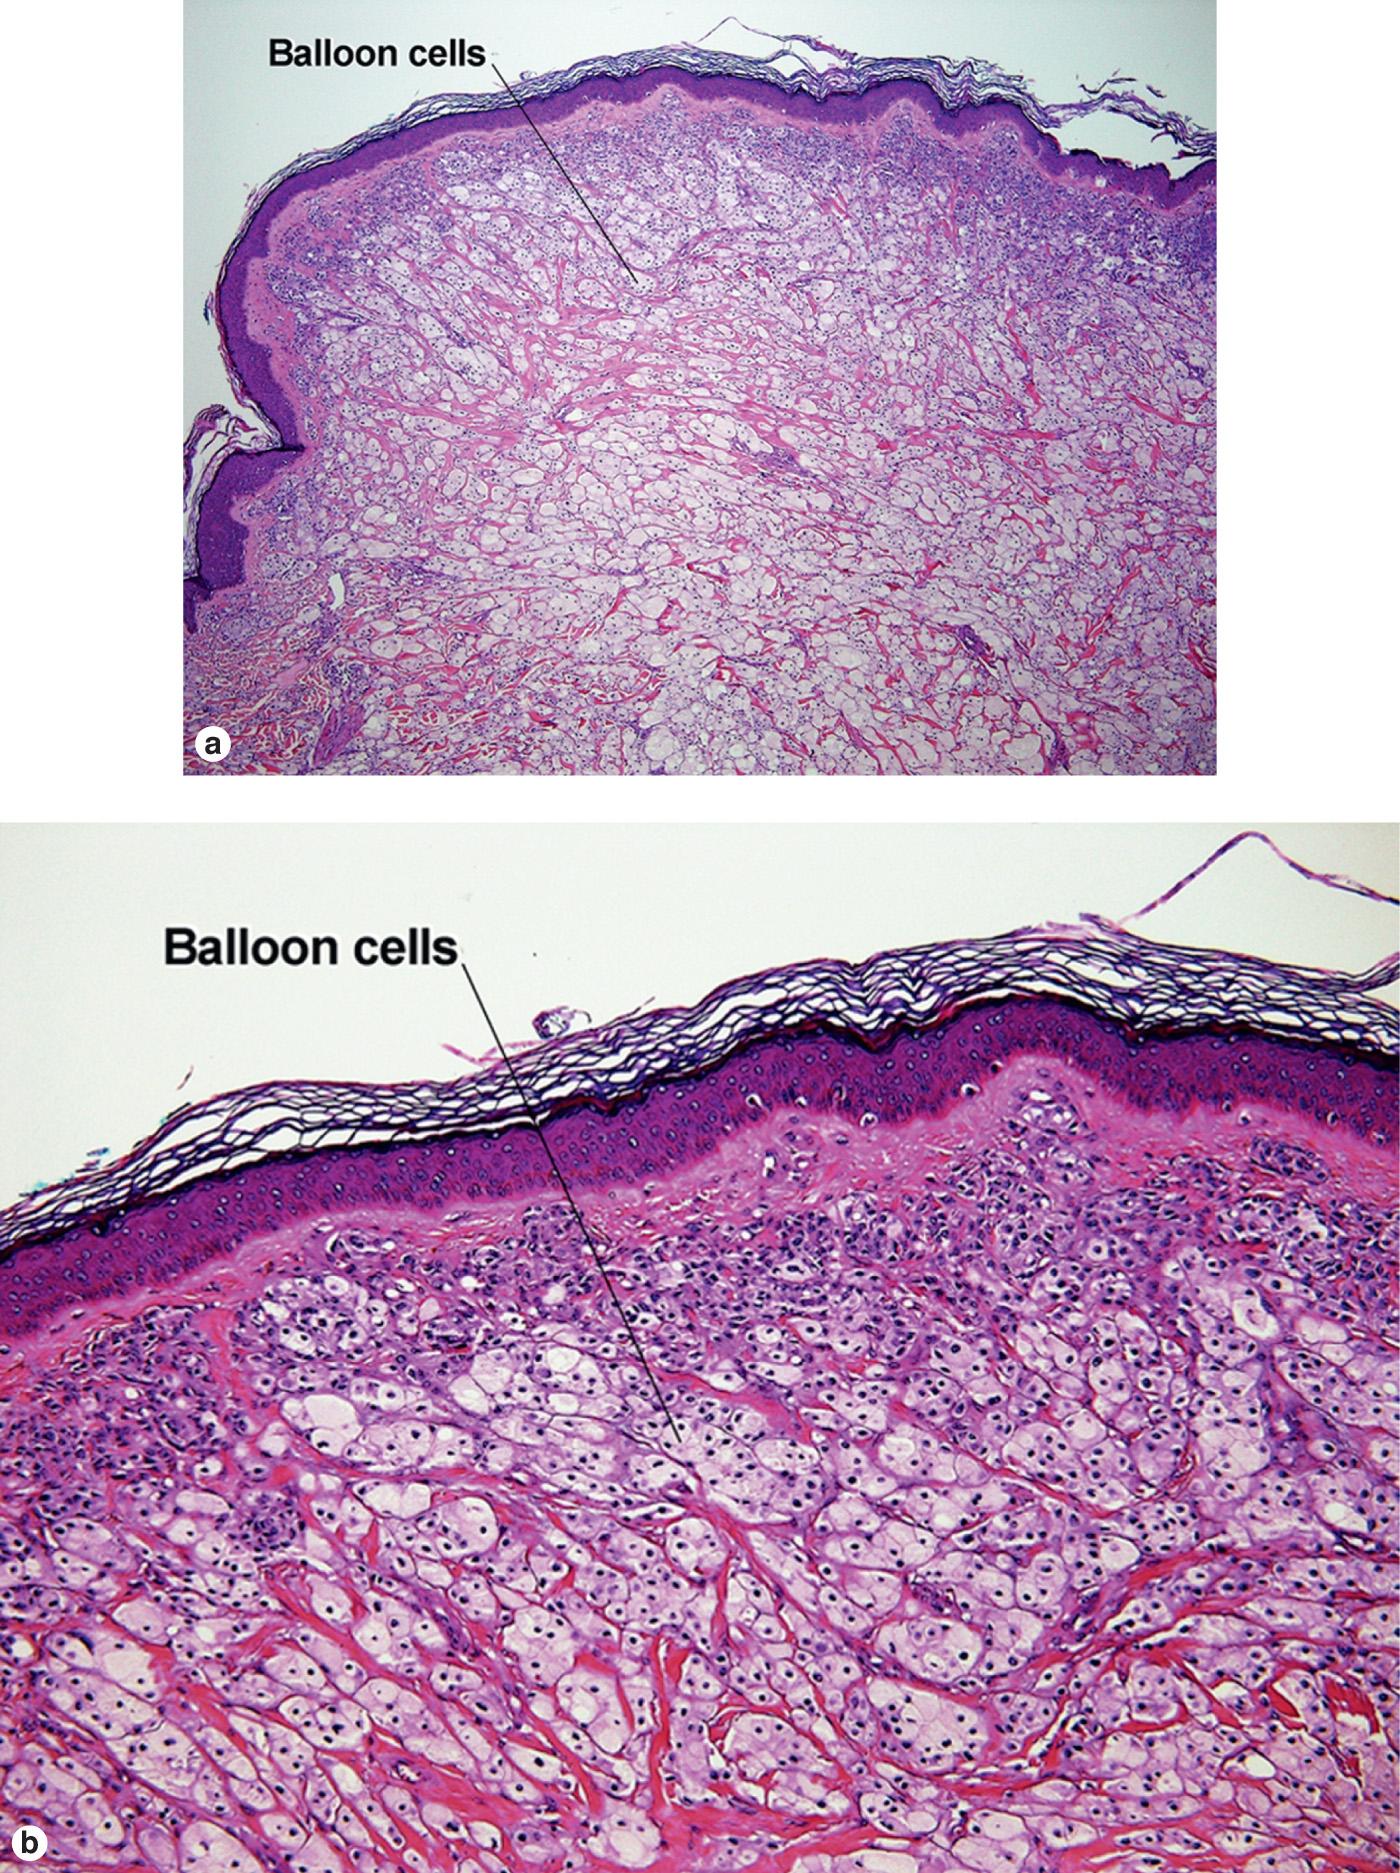 Fig. 6.4, Balloon cell nevus